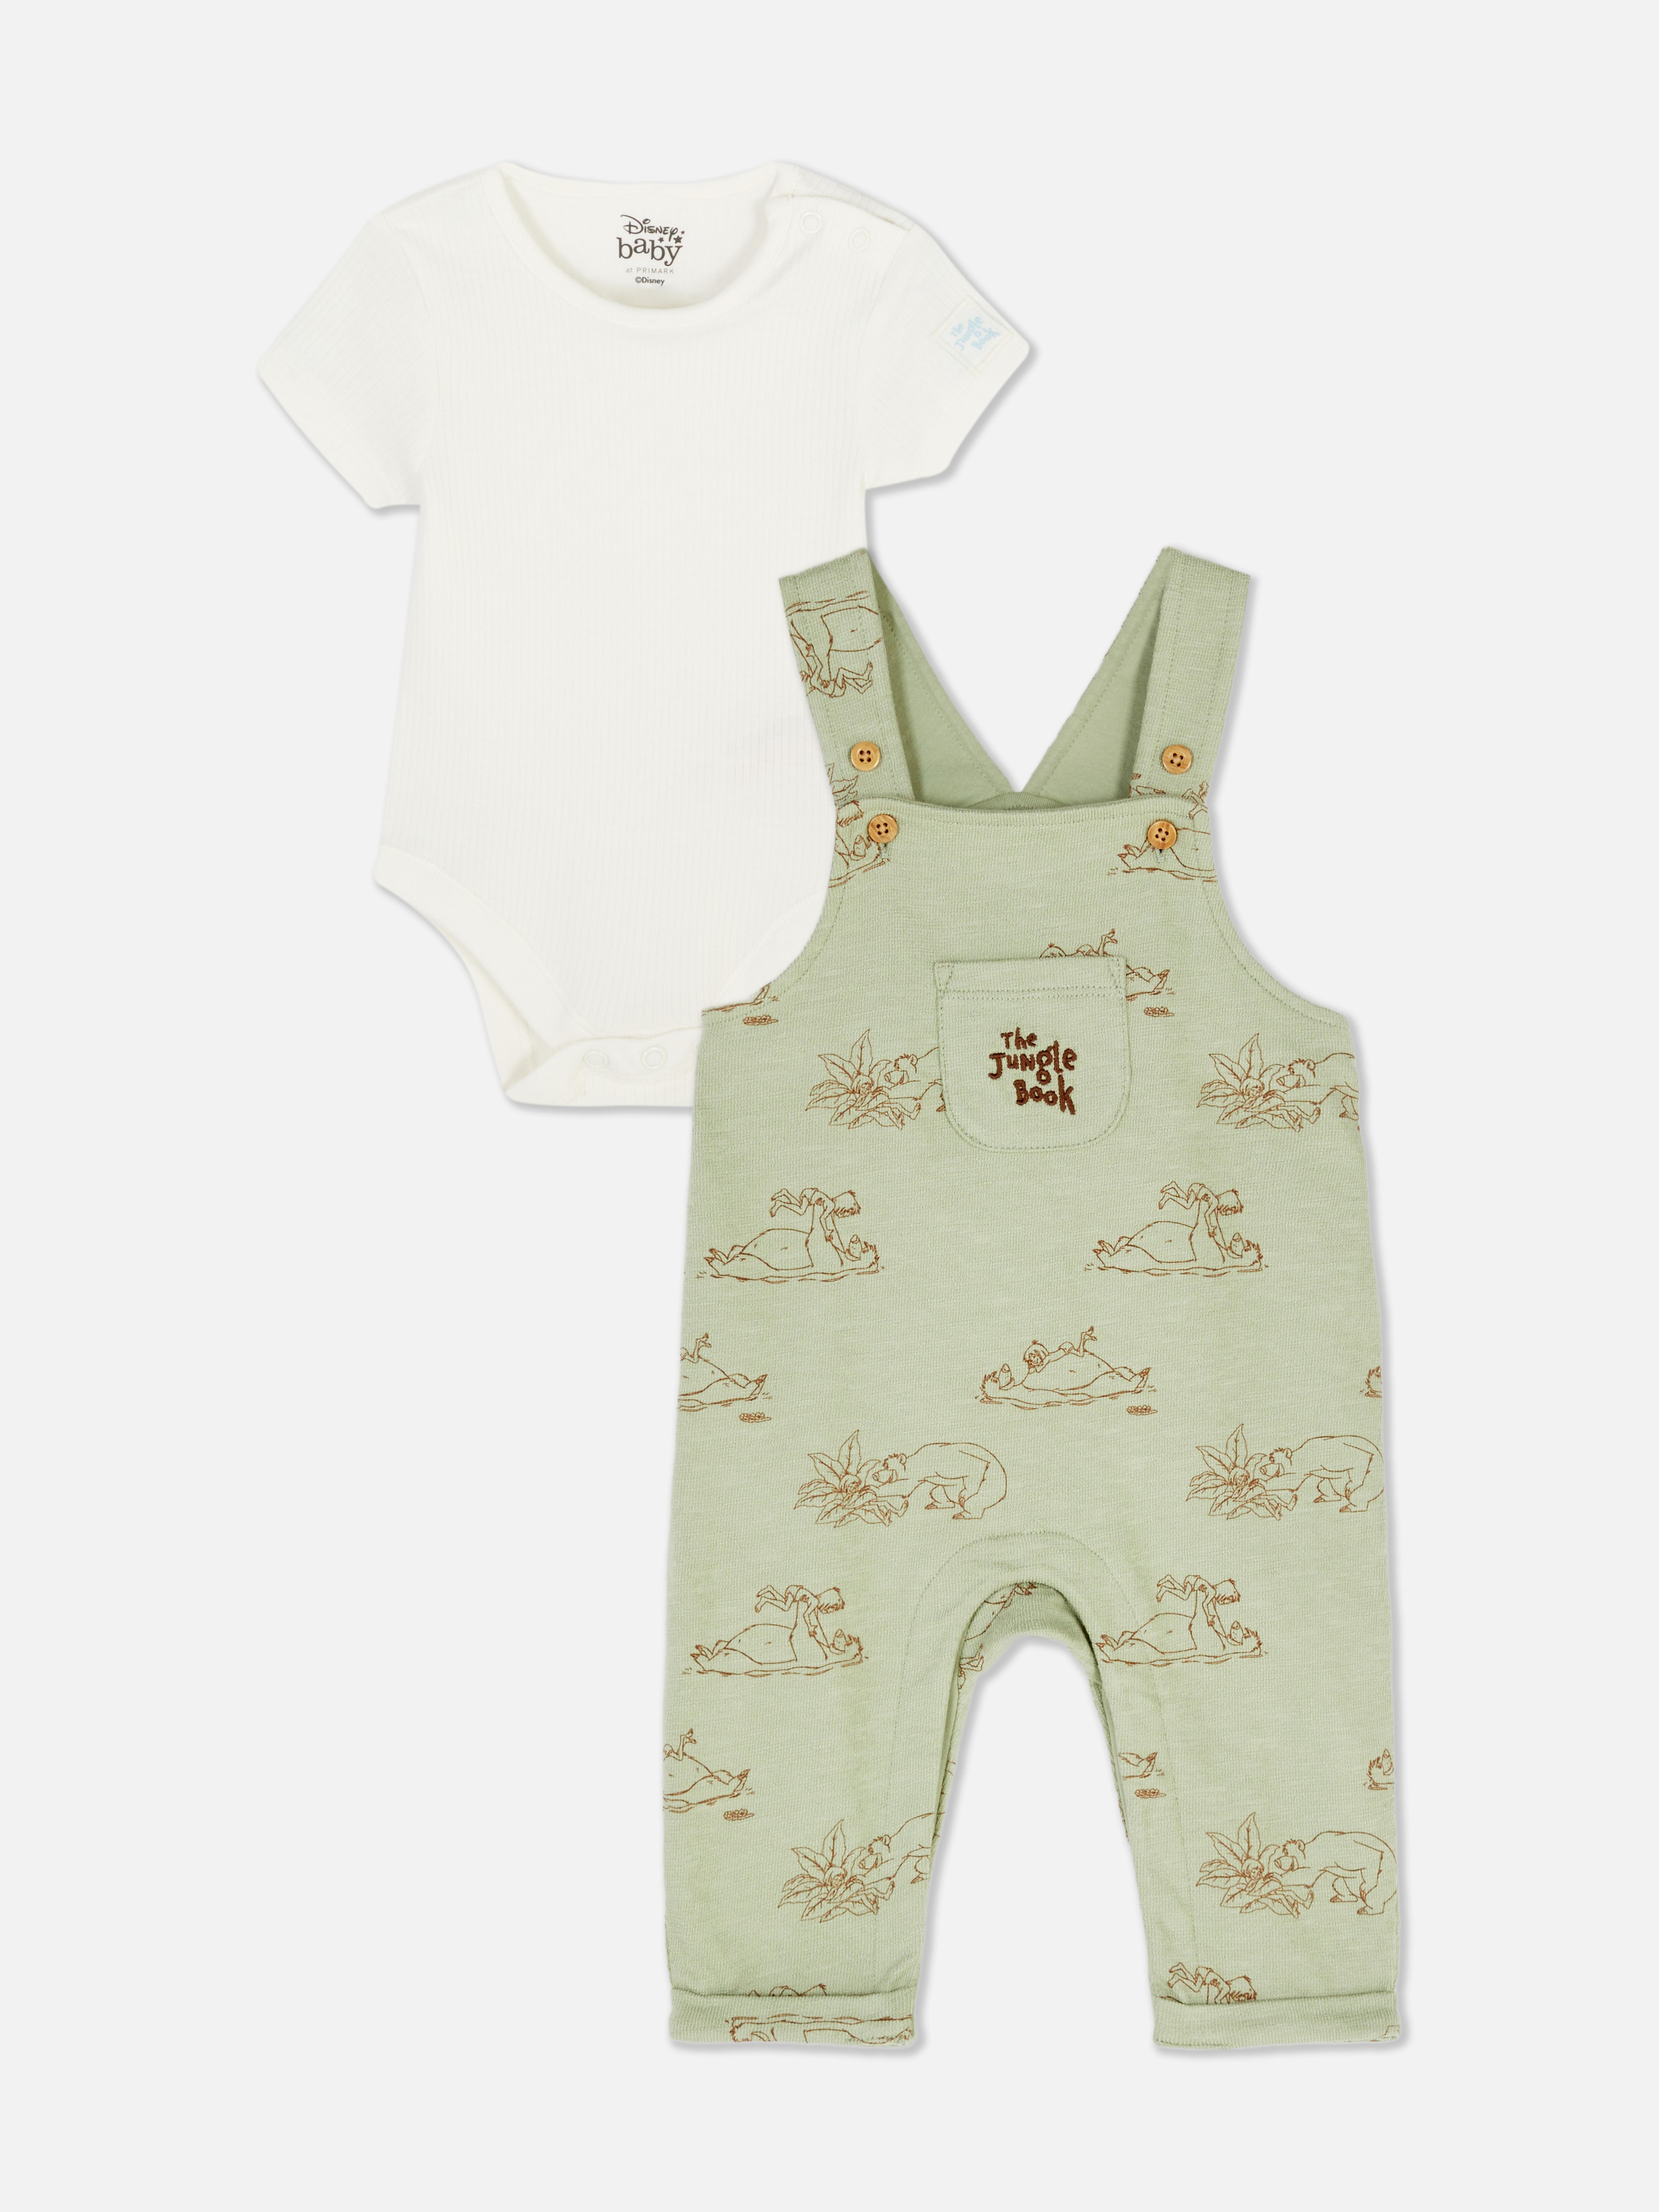 Disney’s The Jungle Book Bodysuit and Dungarees Set